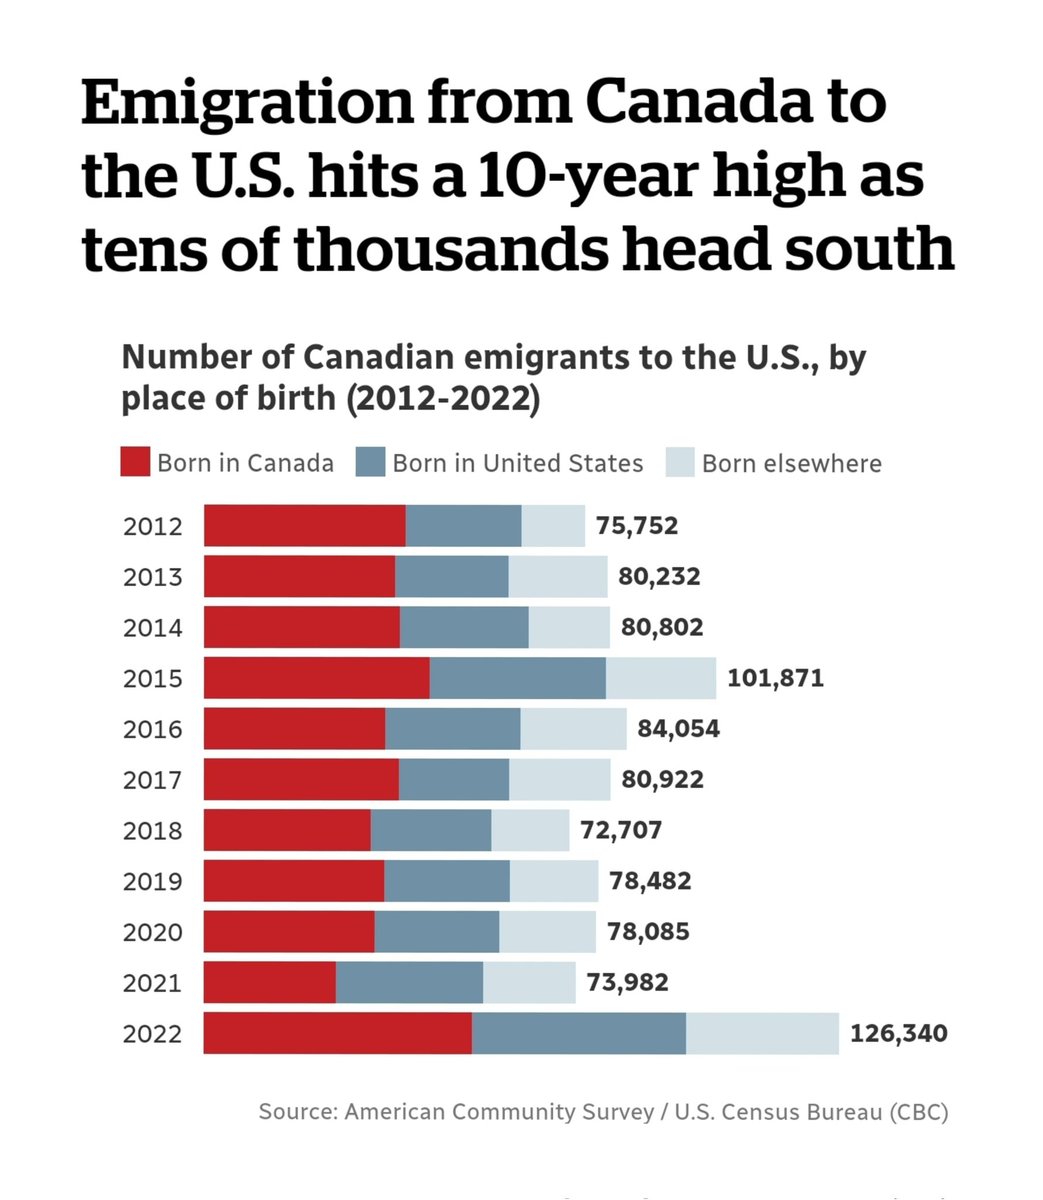 This is what brain drain looks like. A 10 year high of people leaving Canada for the US. 2022 saw a 70% increase from 2012. Notice that not only a record of Canadian born people leaving but also immigrants that weren't born in Canada or the US are leaving Canada. This is